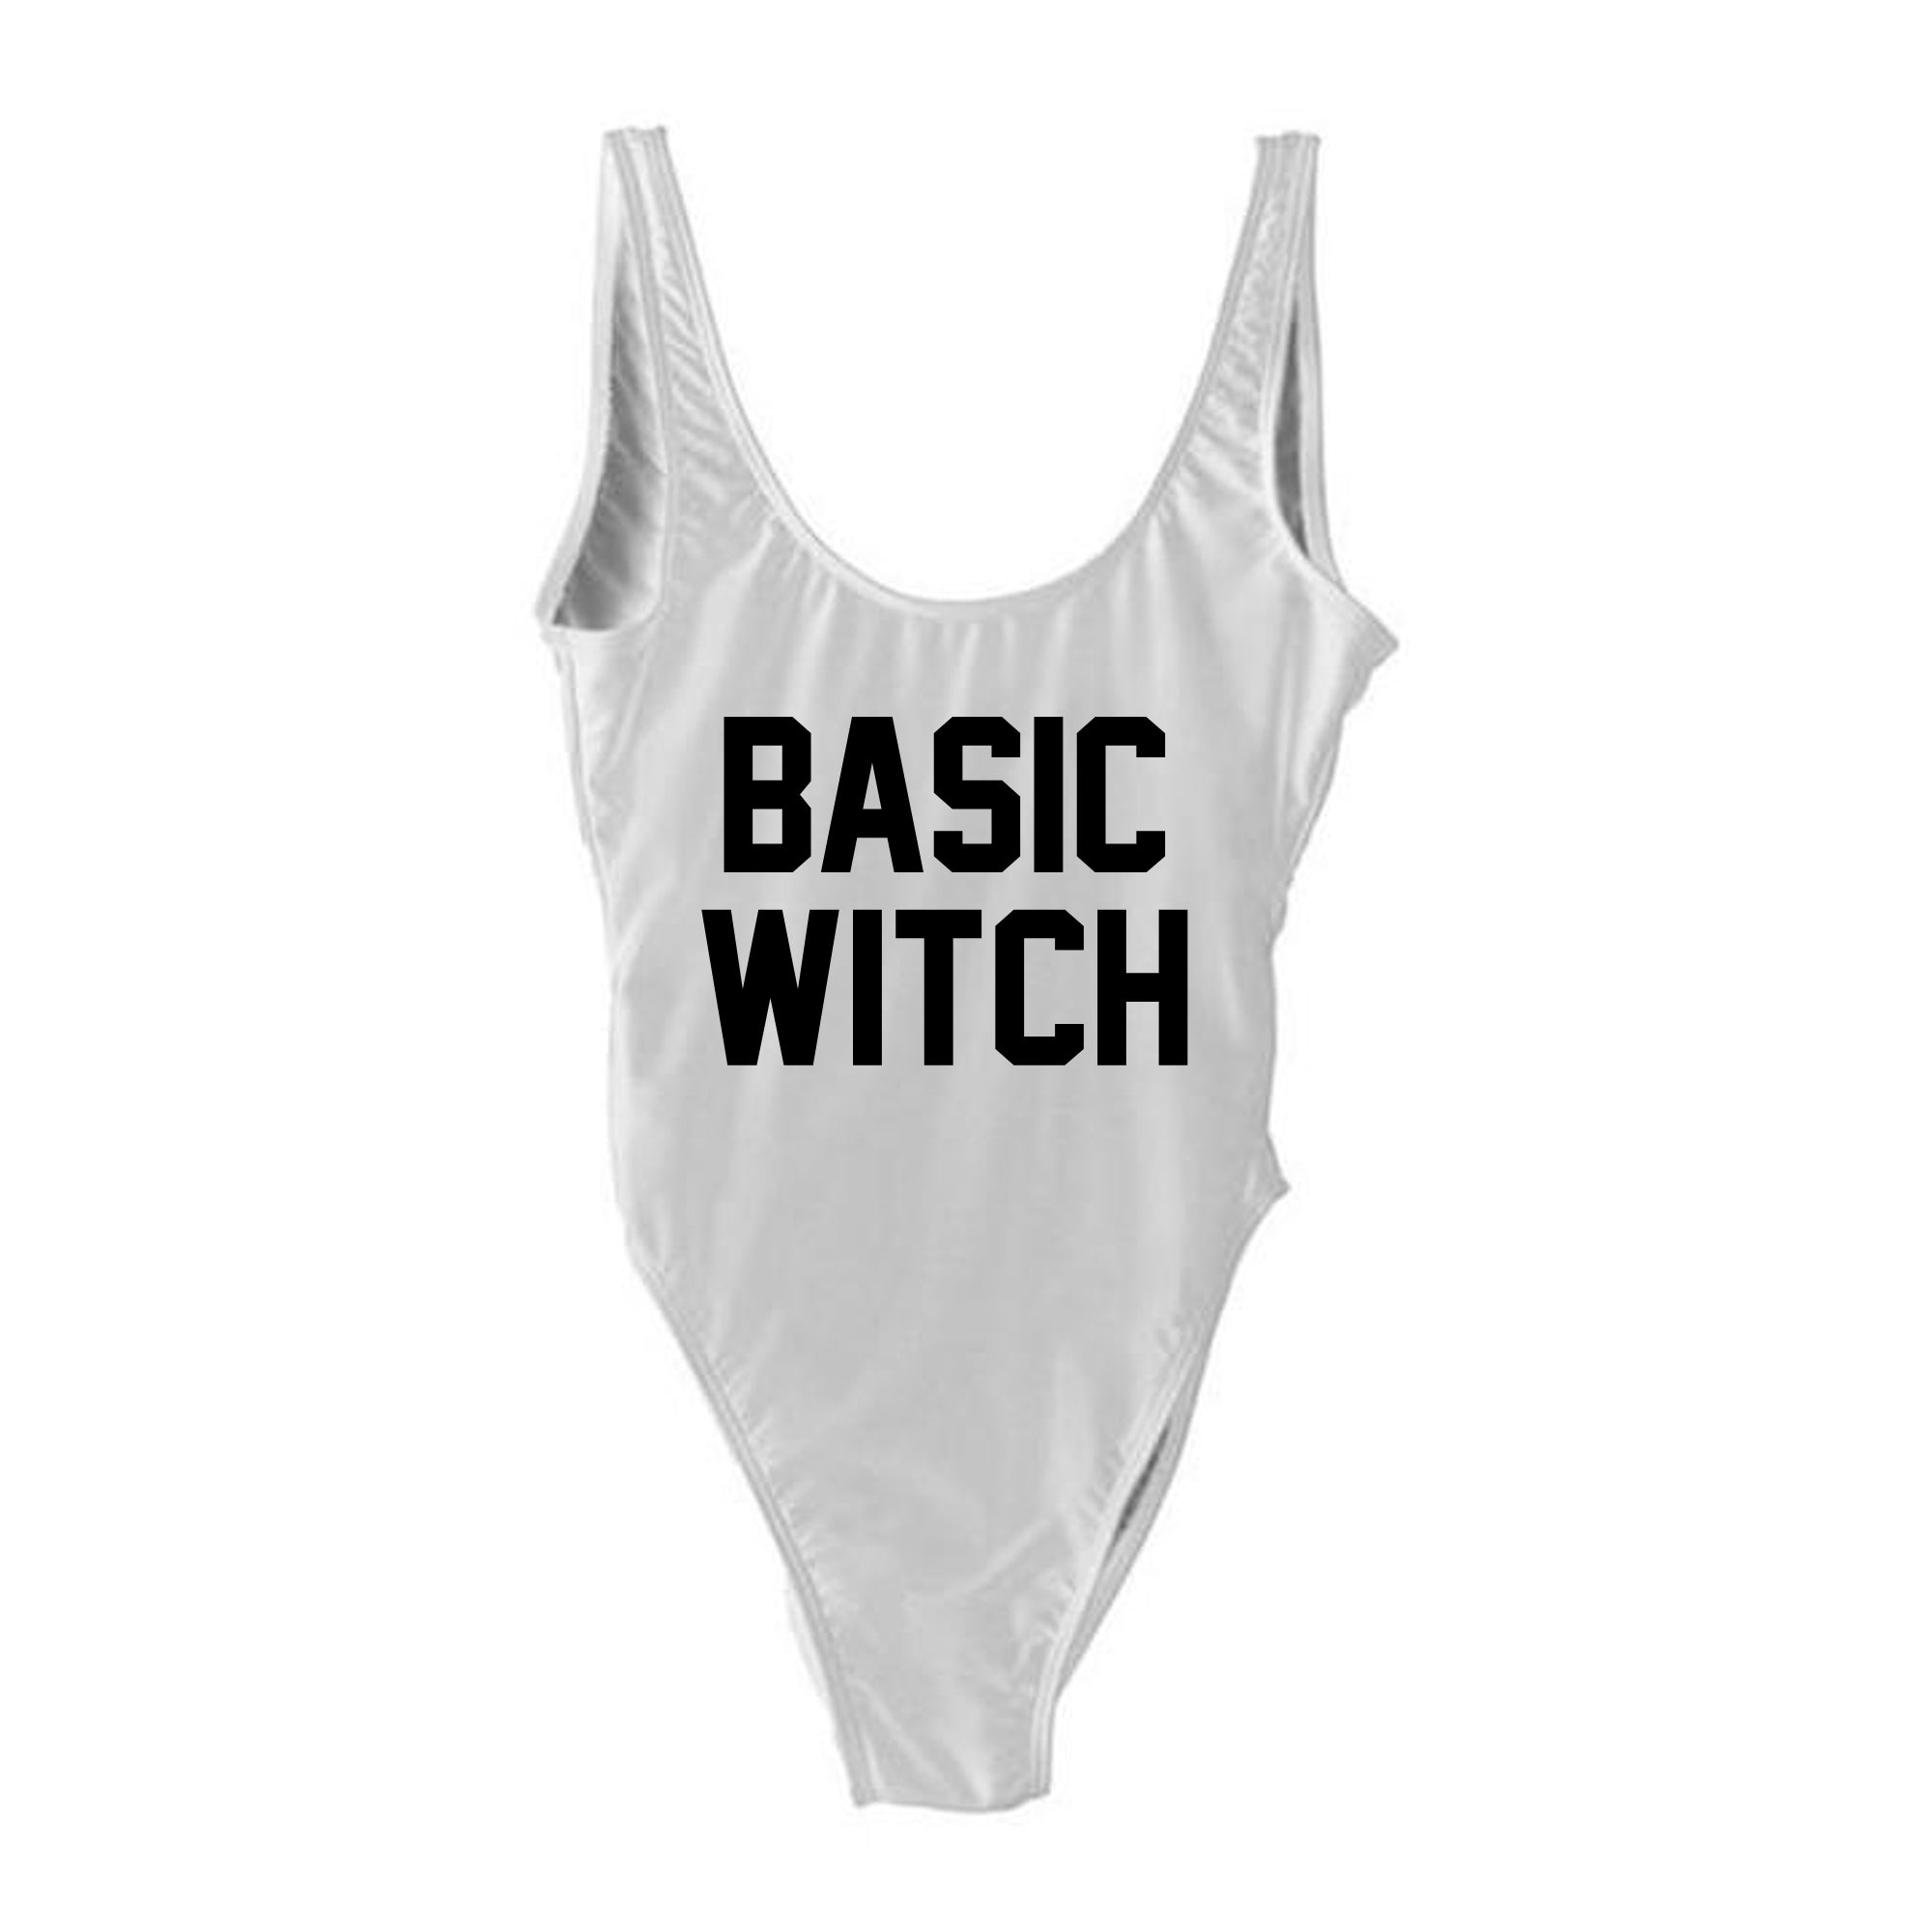 Basic Witch Costume [SWIMSUIT]